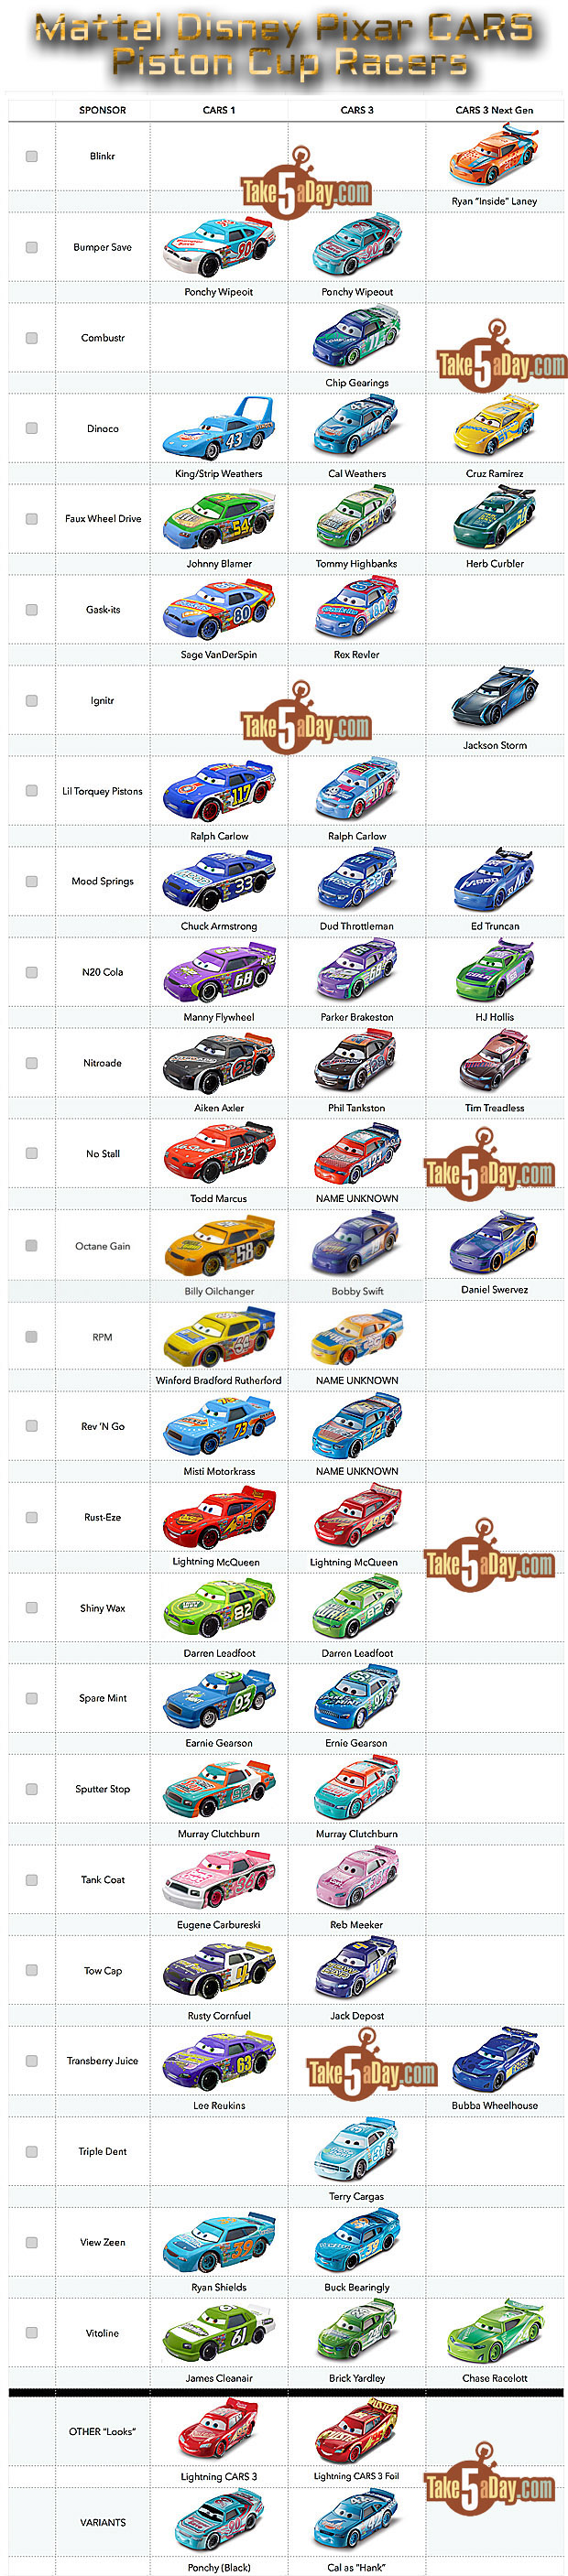 mattel-disney-pixar-cars-3-piston-cup-racers-cars-1-to-cars-3-visual-checklist-take-five-a-day